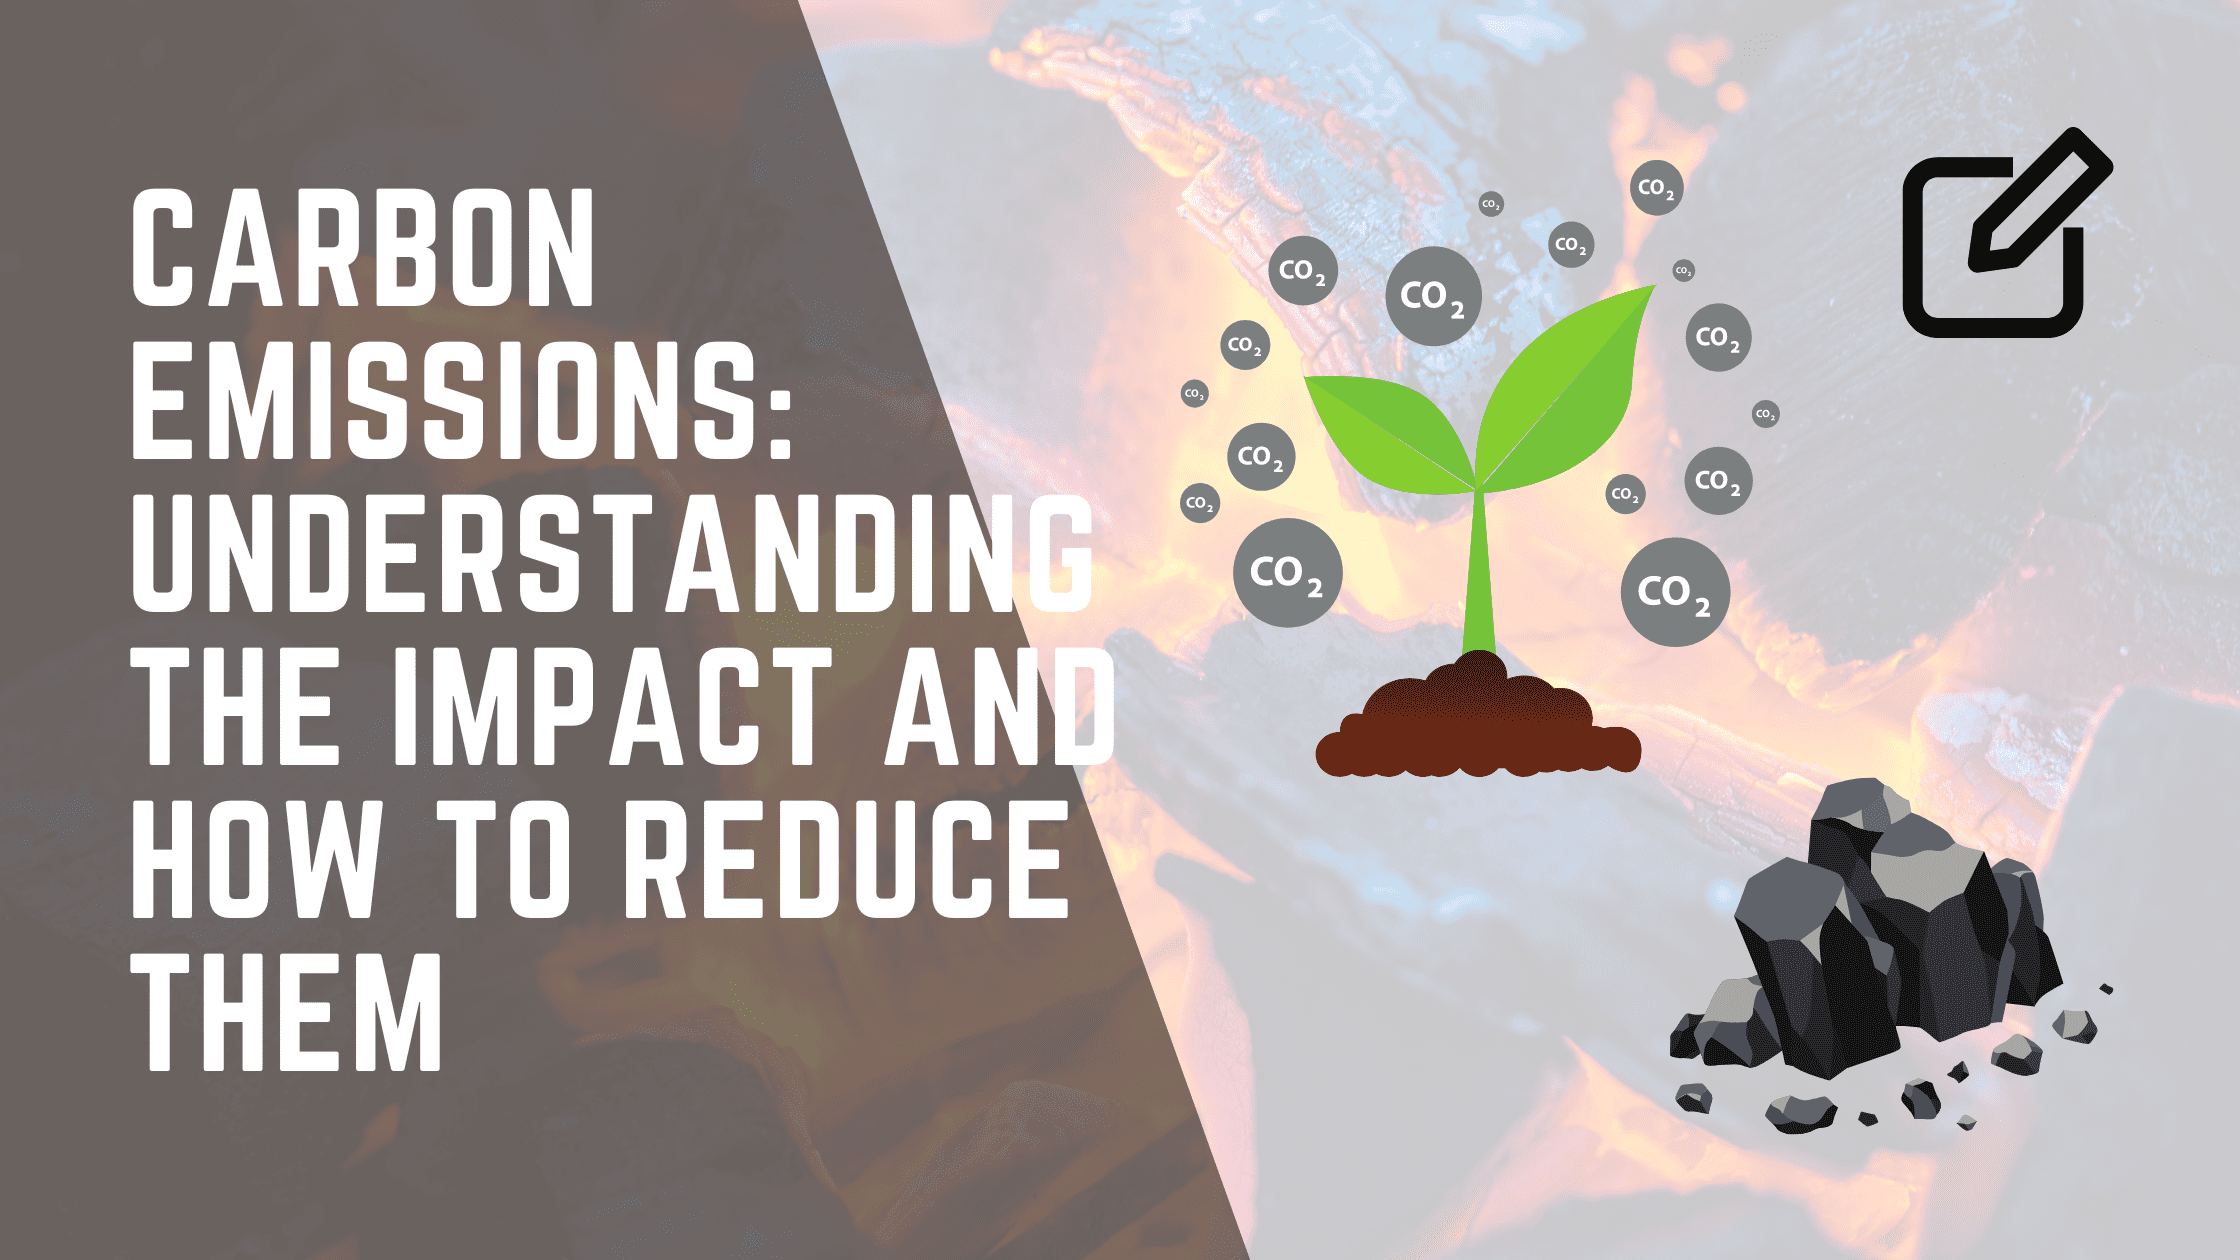 Carbon Emissions: Understanding the Impact and How to Reduce Them